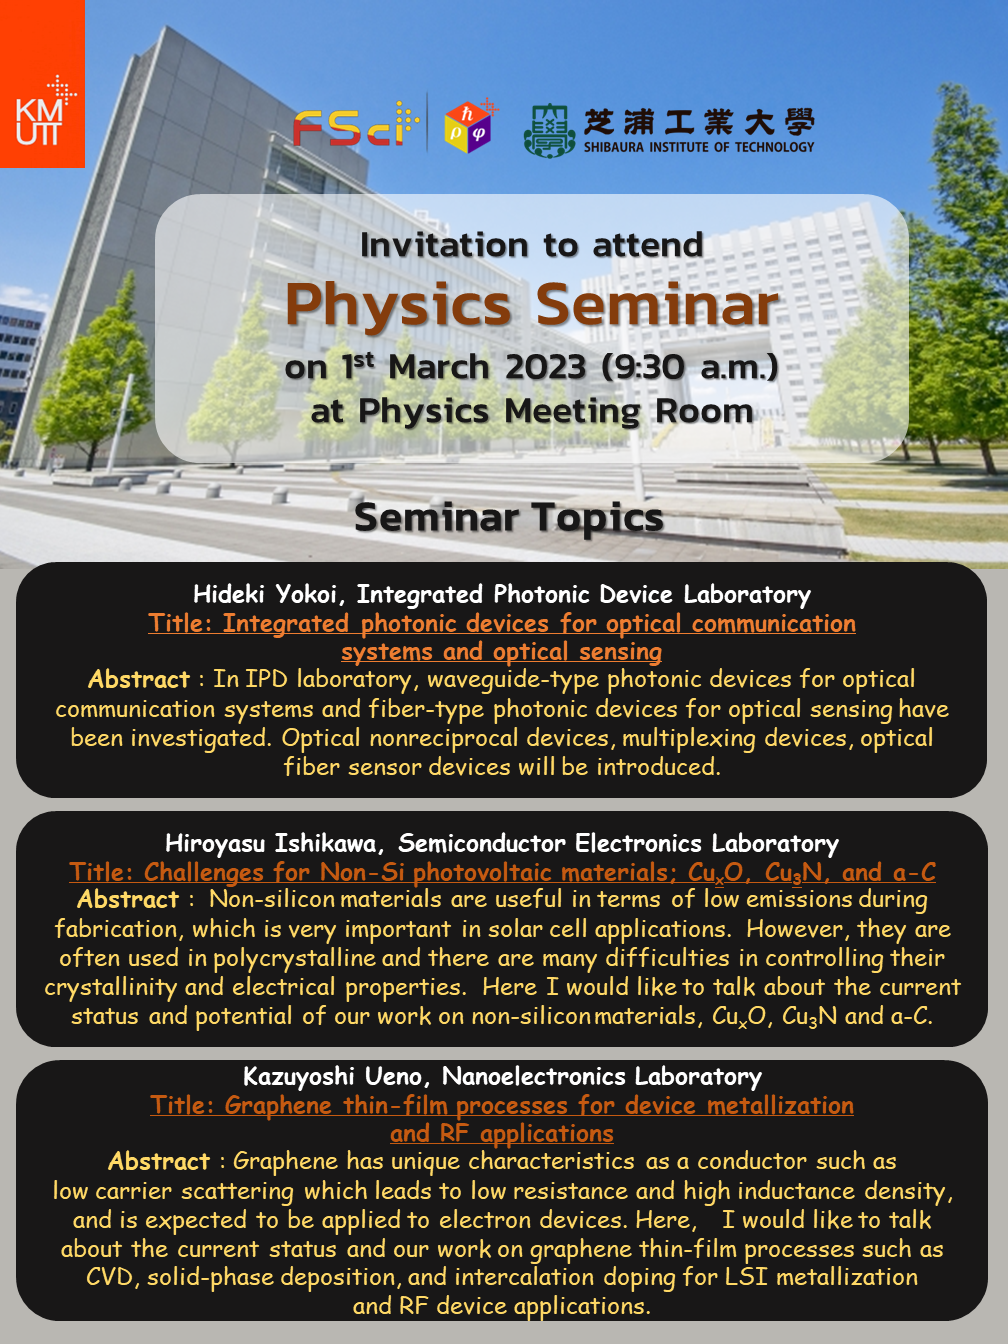  Invitation to attend “Physics Seminar” on 1st March 2023 (9:30 a.m.) at Physics Meeting Room